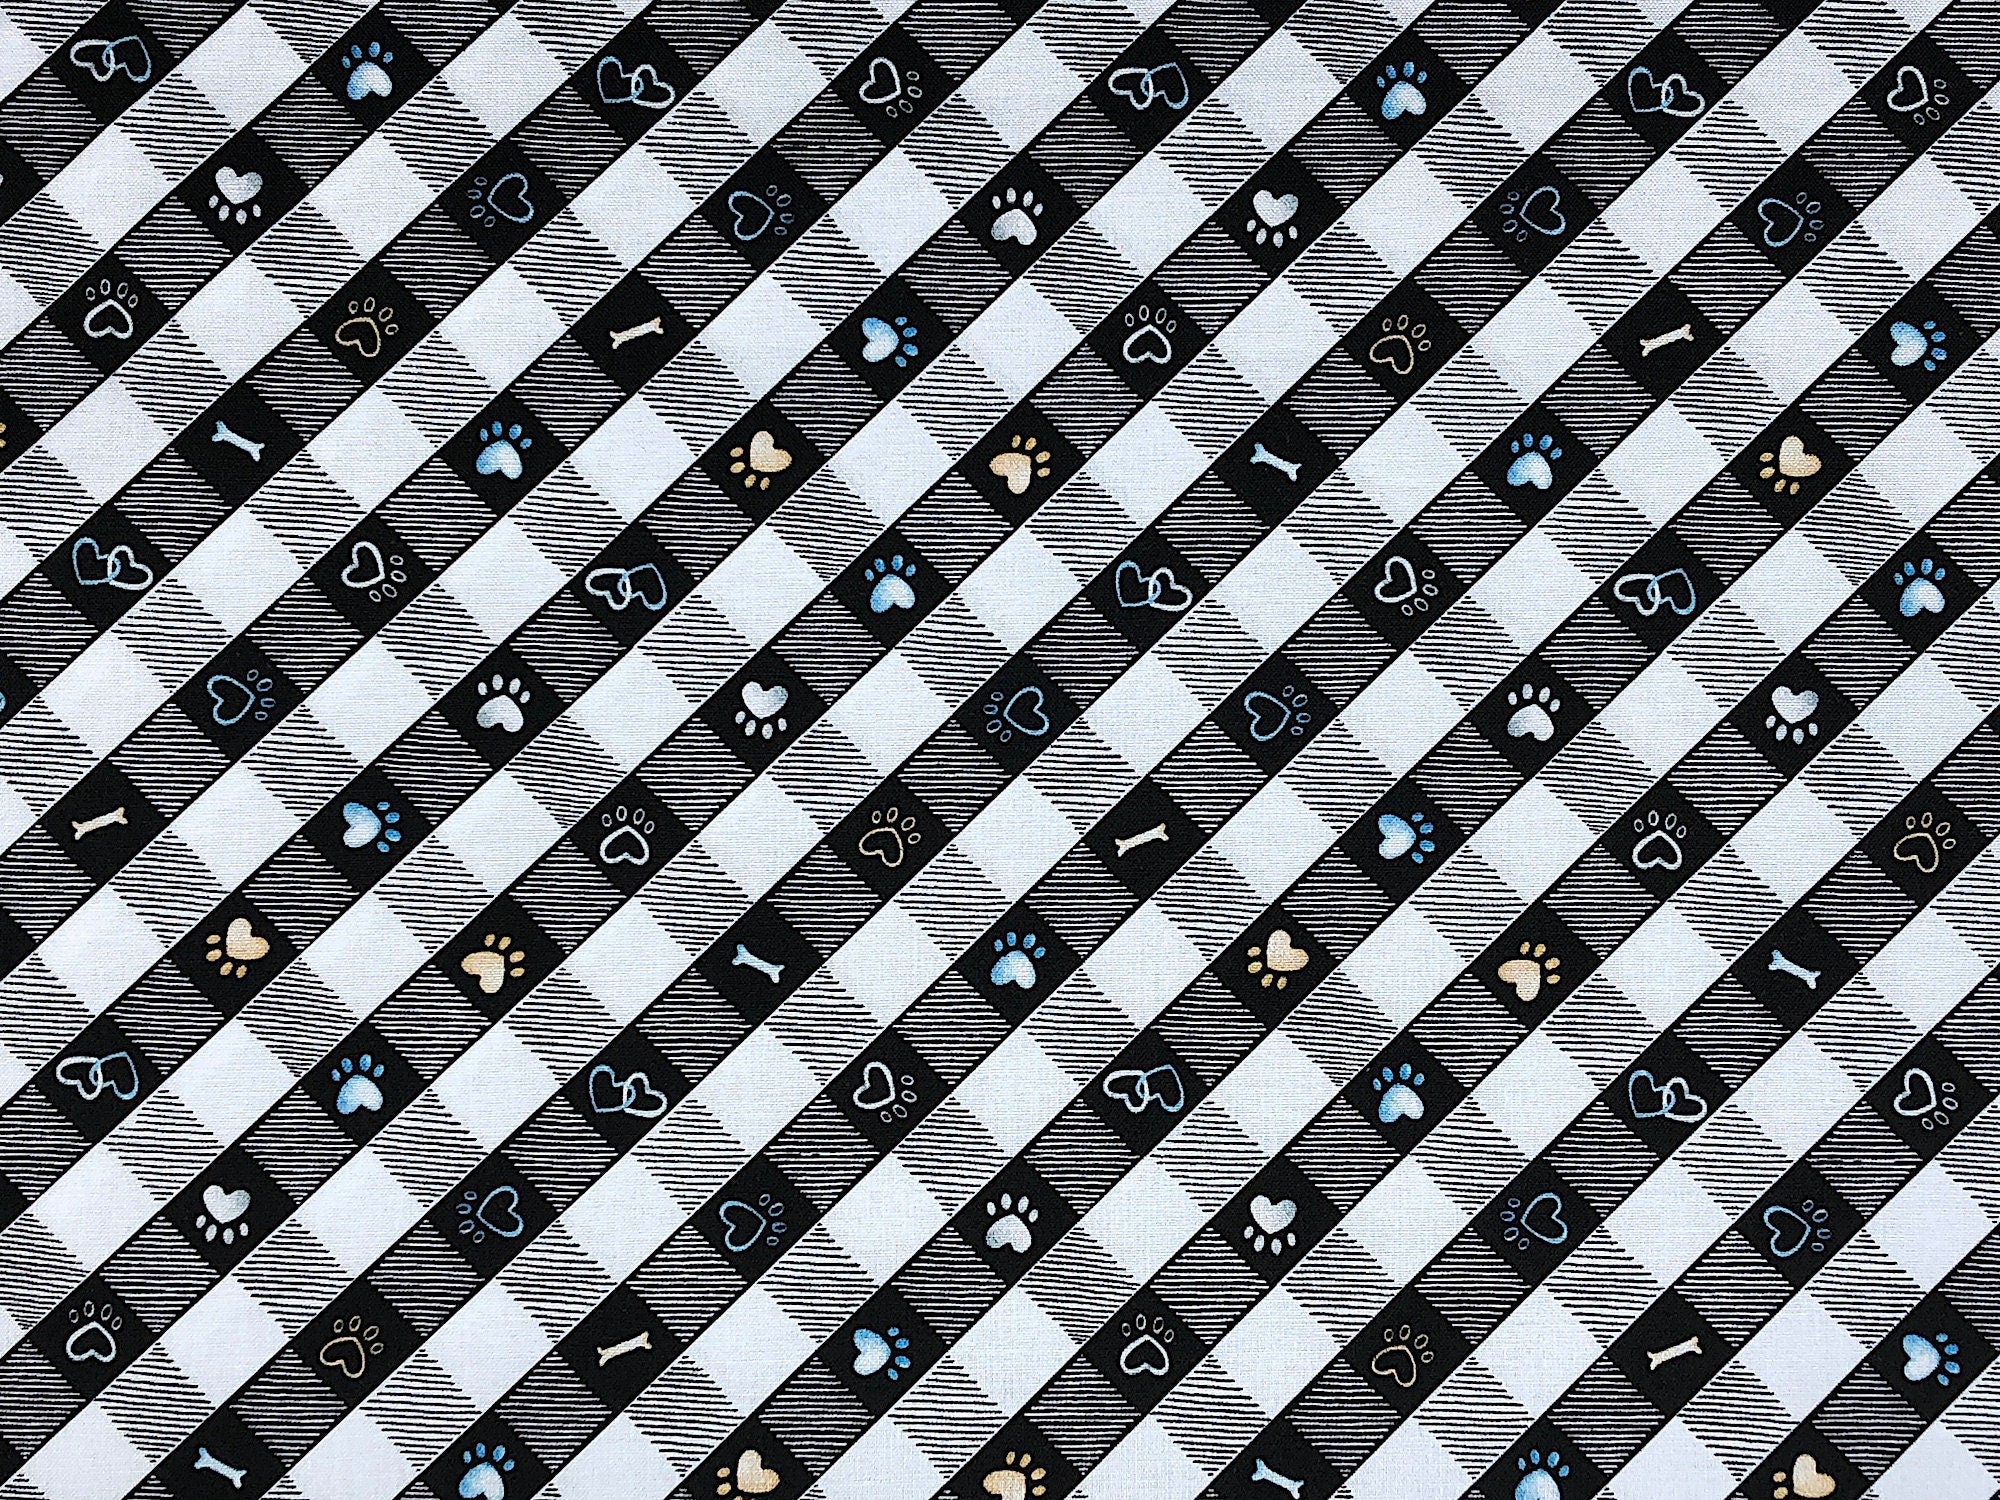 This black and white plaid fabric is covered with paw prints and dog bones. This fabric is part of the Think Pawsitive collection designed by Andi Metz.